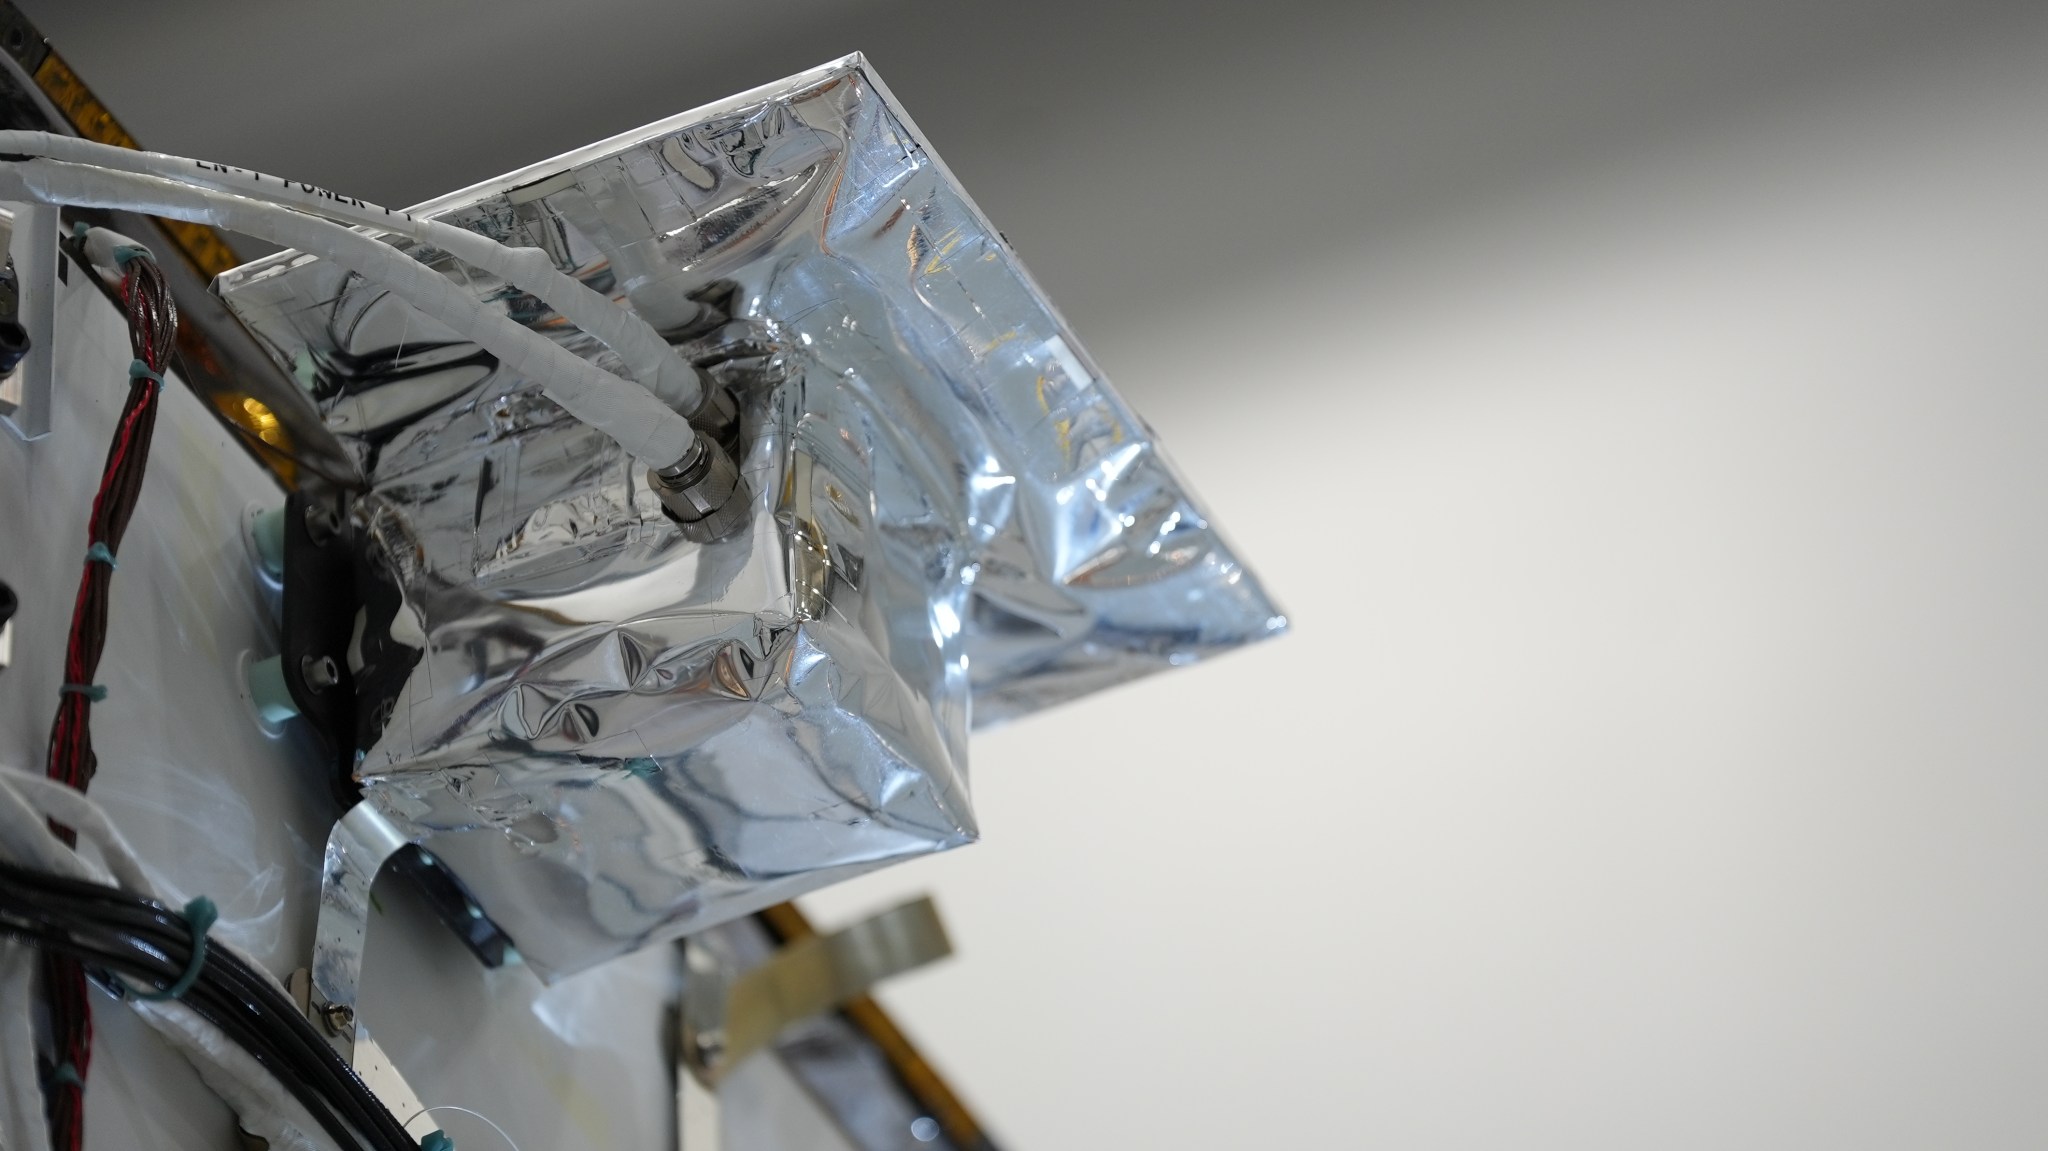 An close up image of the Lunar Node-1 payload covered in a silver wrapping to protect it in space.